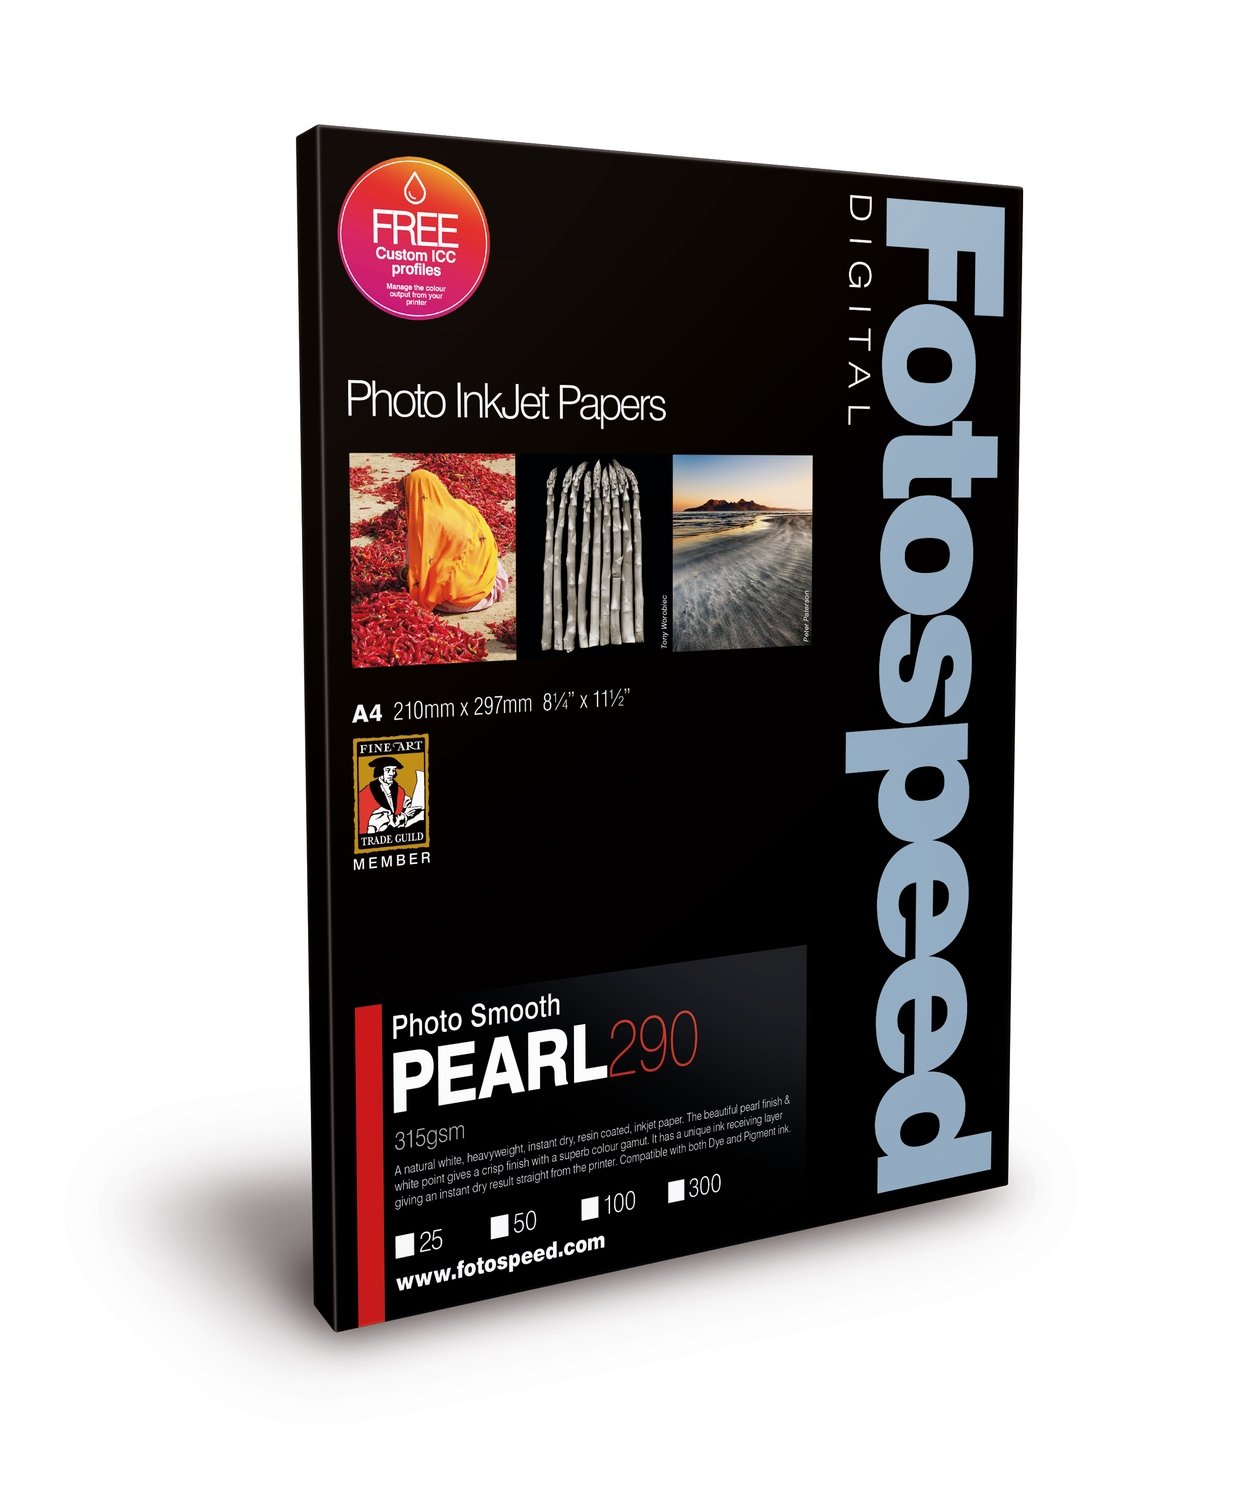 Fotospeed Photo Smooth Pearl 290 (A3, 300 sheets) - 7D594